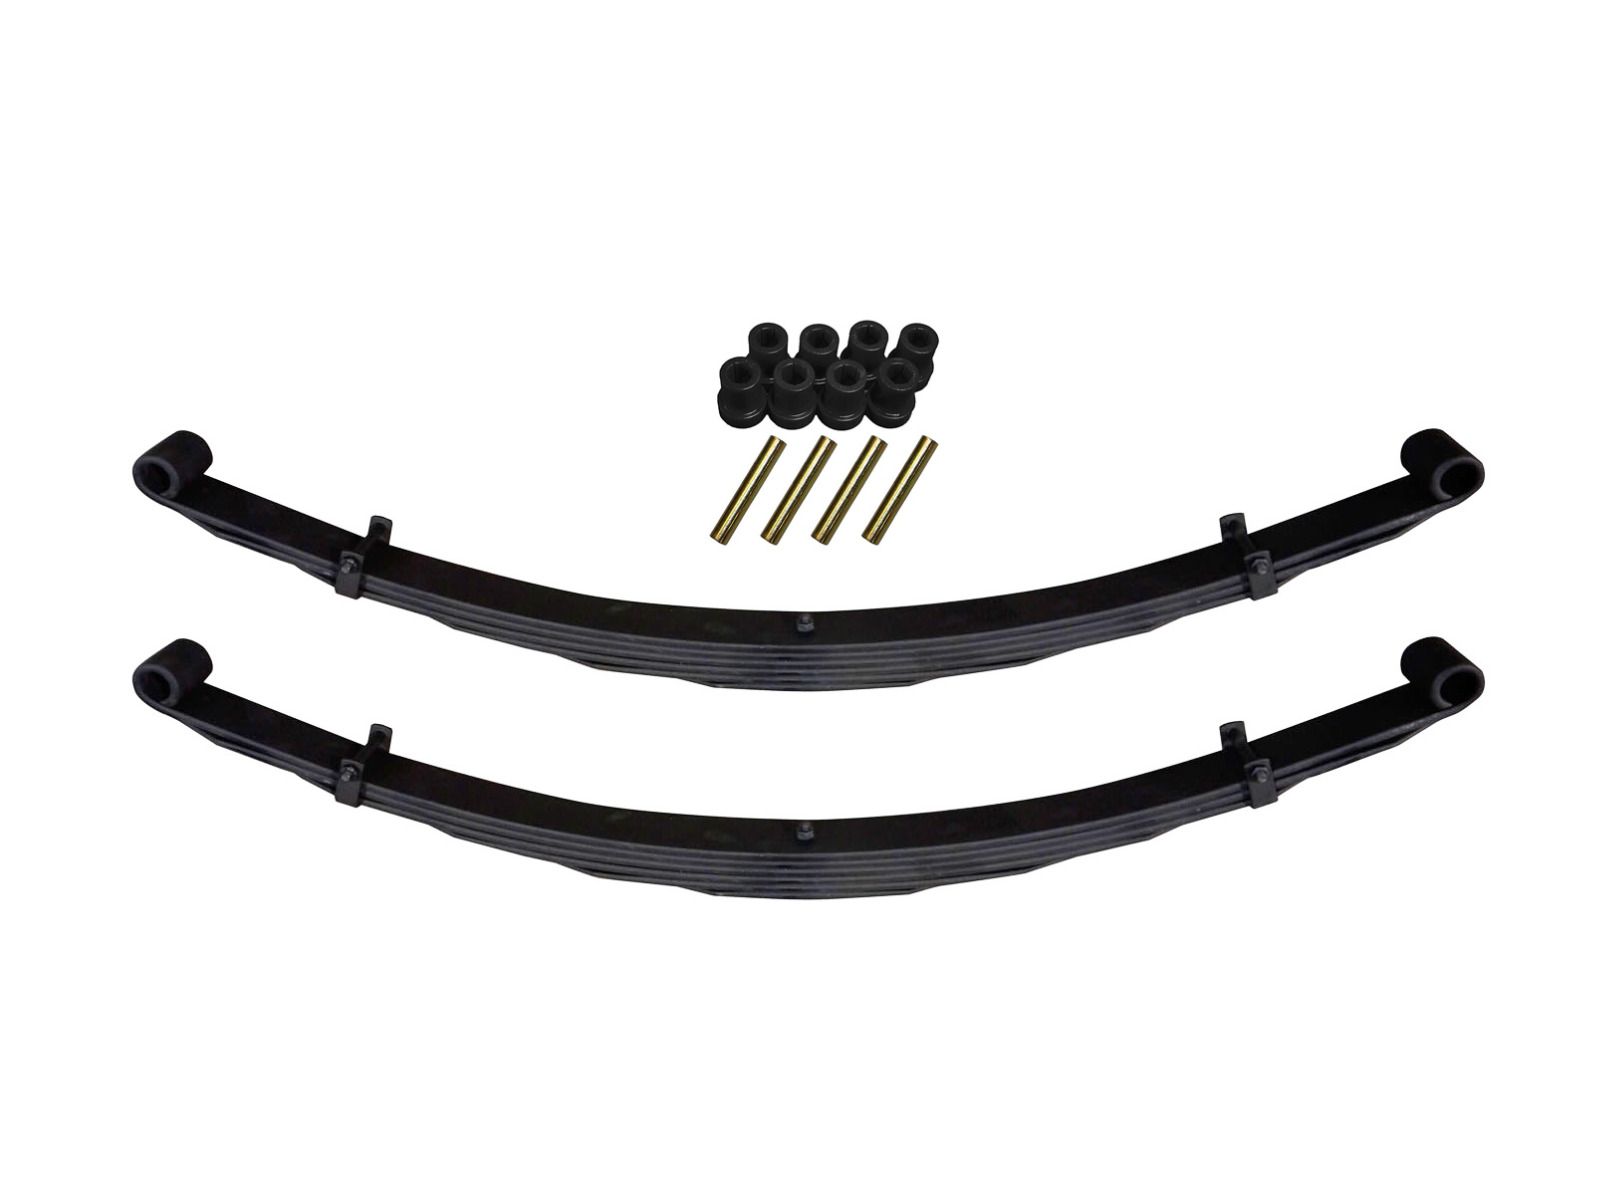 F250 1967-1977 Ford 4wd (High Boy) - Front 4" Lift Leaf Spring Kit (with bushings) by Skyjacker